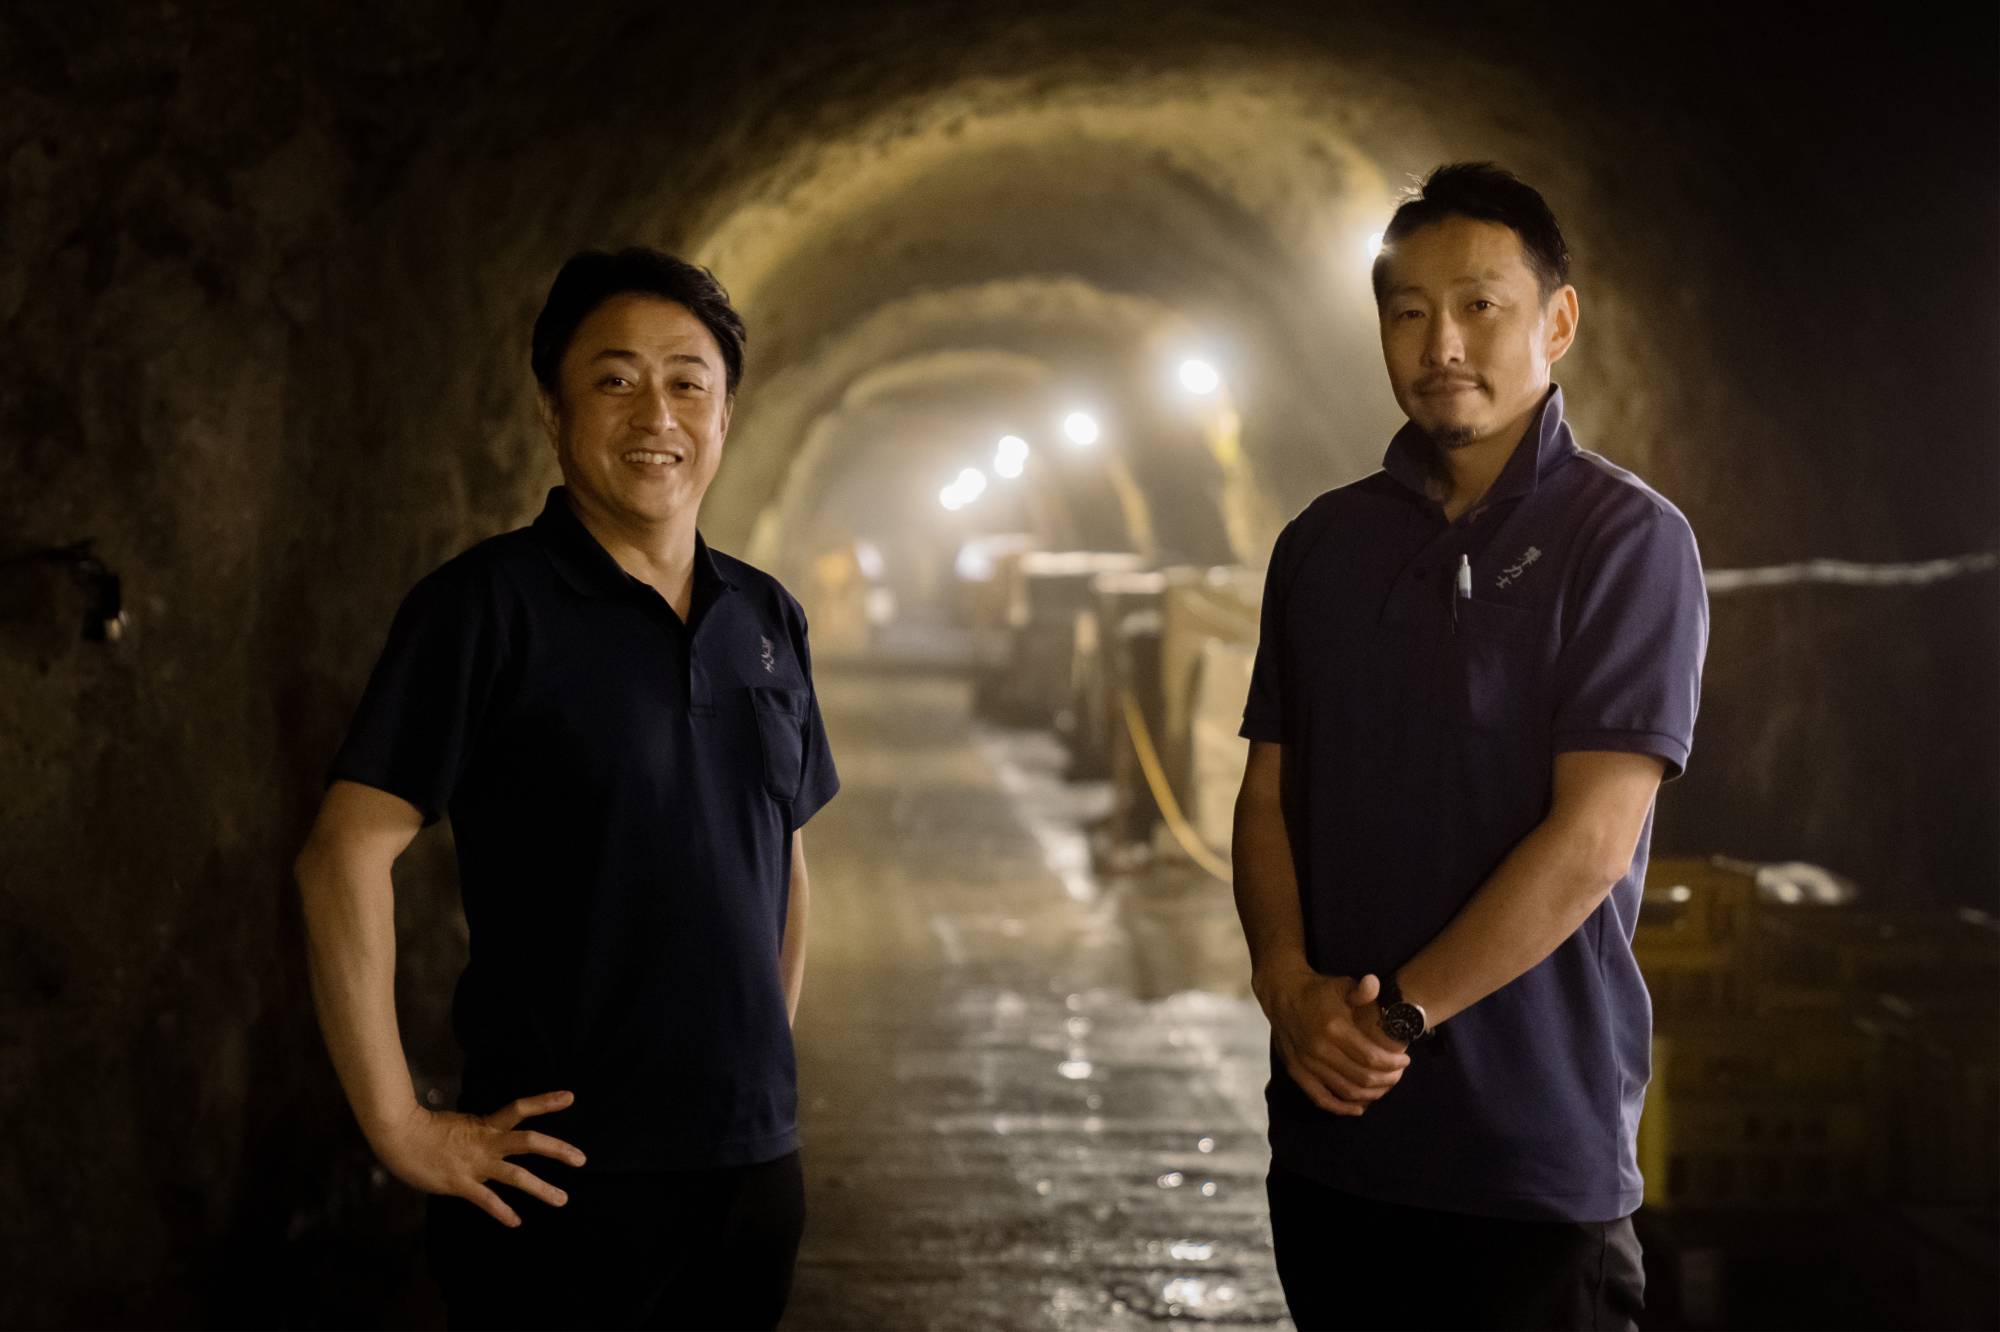 Shimazaki Brewery president Kenichi Shimazaki (left) and cave manager Tetsuya Kasai claim their unique aging techniques produce superior sips of Japan's essential drink. | COURTESY OF CINDY BISSIG